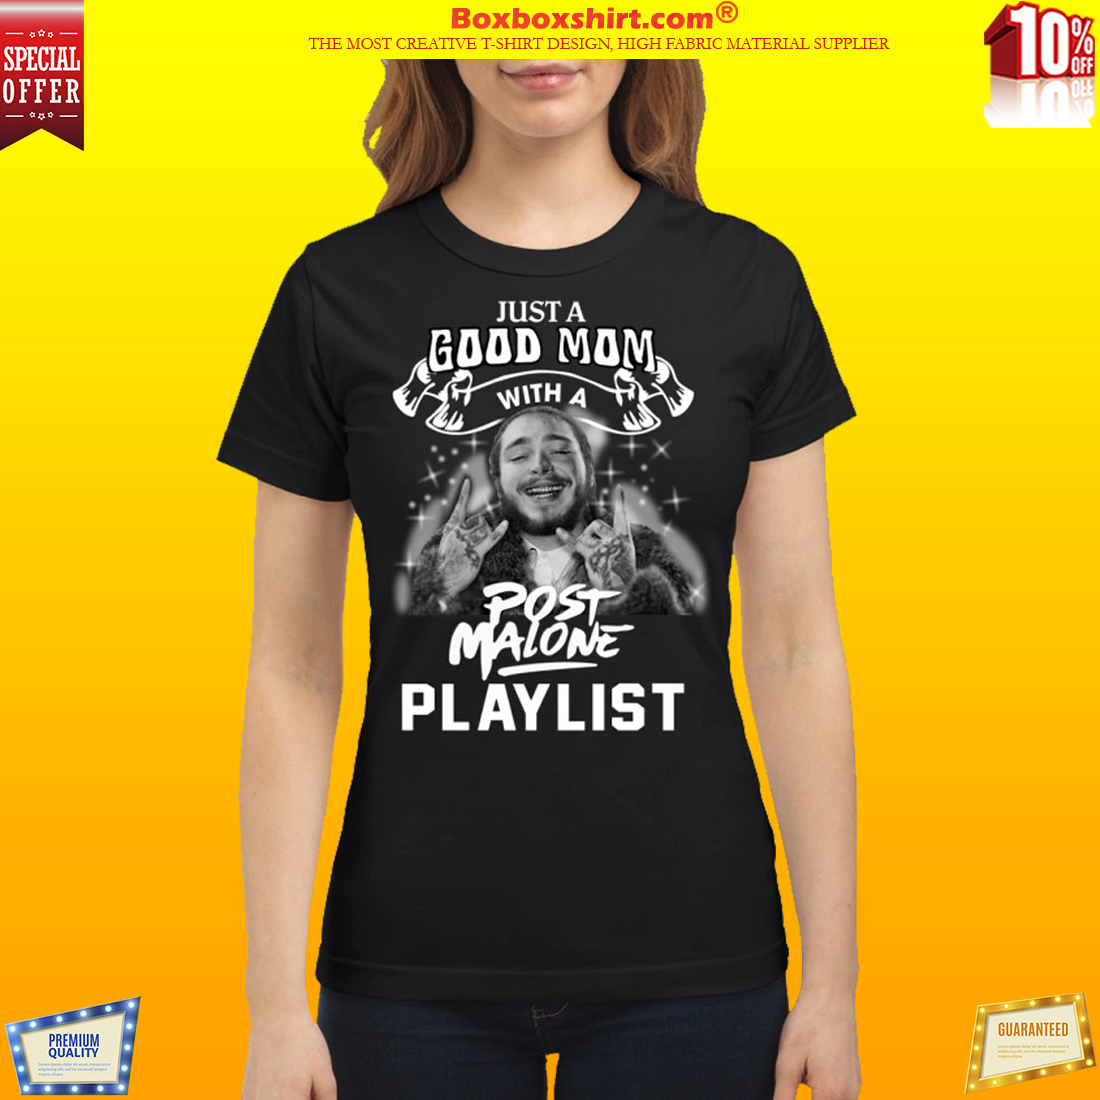 Just a good mom with a Post Malone playlist classic shirt